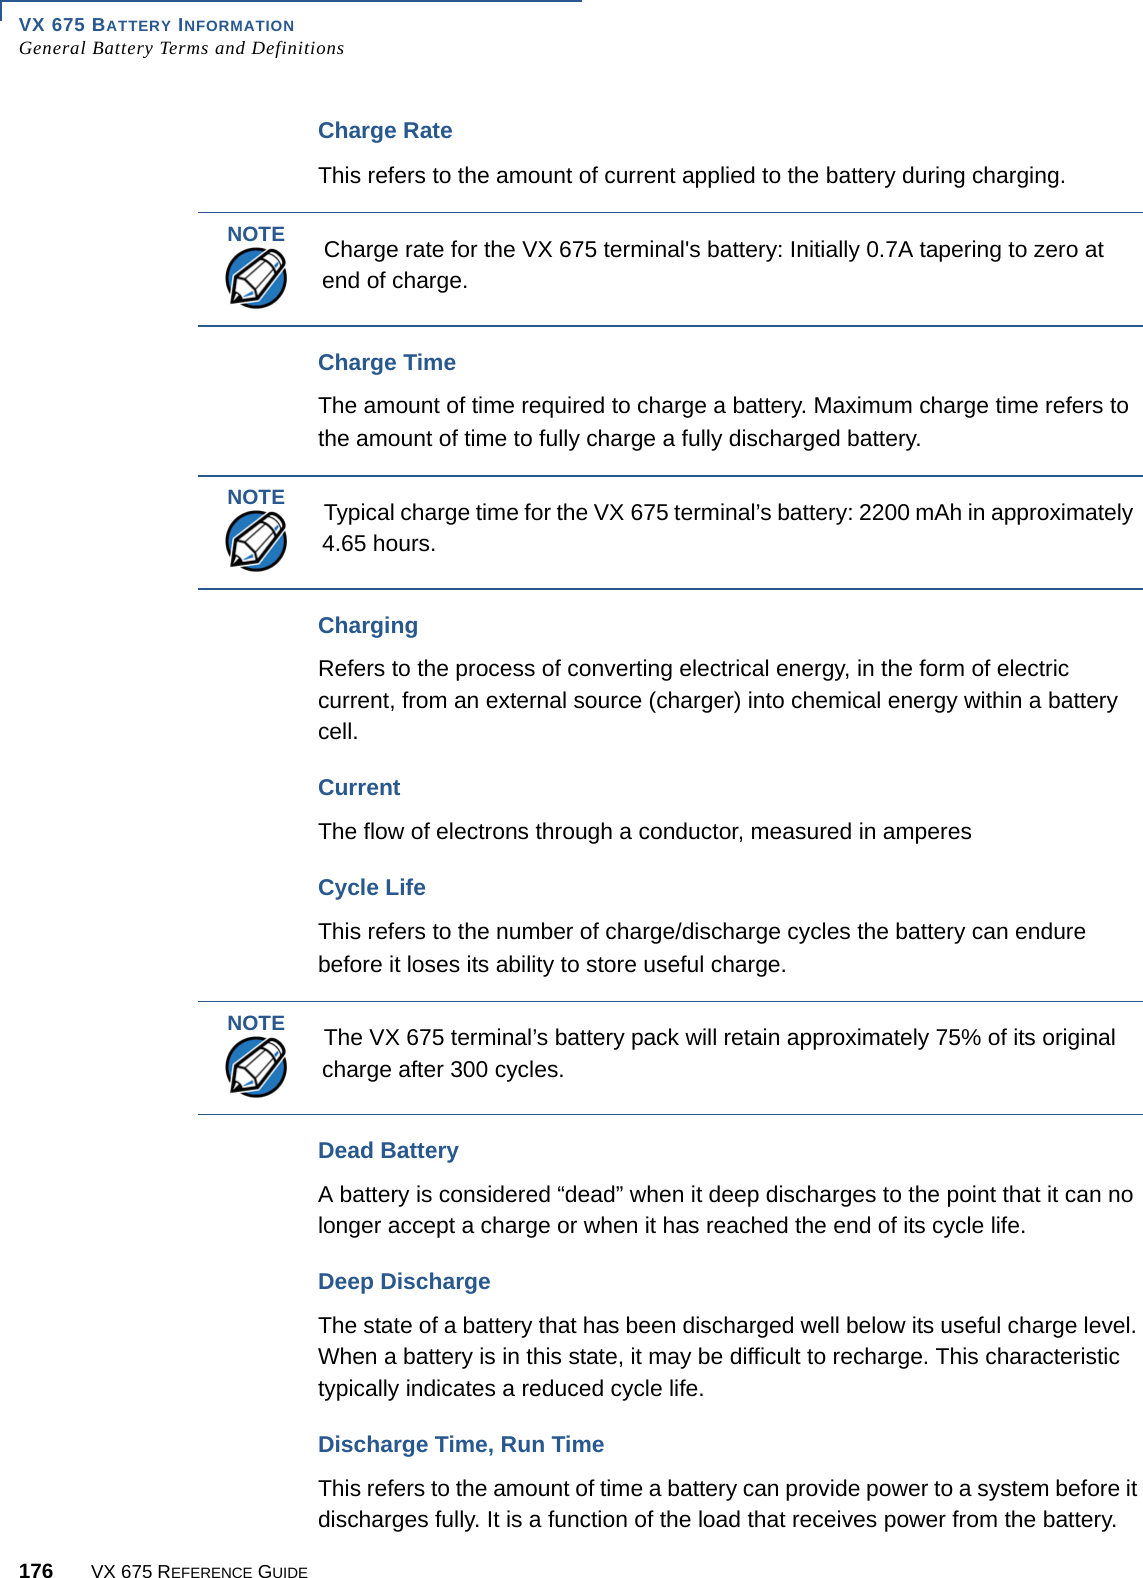 VX 675 BATTERY INFORMATIONGeneral Battery Terms and Definitions176 VX 675 REFERENCE GUIDECharge RateThis refers to the amount of current applied to the battery during charging. Charge TimeThe amount of time required to charge a battery. Maximum charge time refers to the amount of time to fully charge a fully discharged battery. ChargingRefers to the process of converting electrical energy, in the form of electric current, from an external source (charger) into chemical energy within a battery cell. Current The flow of electrons through a conductor, measured in amperesCycle LifeThis refers to the number of charge/discharge cycles the battery can endure before it loses its ability to store useful charge.Dead BatteryA battery is considered “dead” when it deep discharges to the point that it can no longer accept a charge or when it has reached the end of its cycle life. Deep DischargeThe state of a battery that has been discharged well below its useful charge level. When a battery is in this state, it may be difficult to recharge. This characteristic typically indicates a reduced cycle life. Discharge Time, Run TimeThis refers to the amount of time a battery can provide power to a system before it discharges fully. It is a function of the load that receives power from the battery. NOTECharge rate for the VX 675 terminal&apos;s battery: Initially 0.7A tapering to zero at end of charge.NOTETypical charge time for the VX 675 terminal’s battery: 2200 mAh in approximately 4.65 hours.NOTEThe VX 675 terminal’s battery pack will retain approximately 75% of its original charge after 300 cycles. 